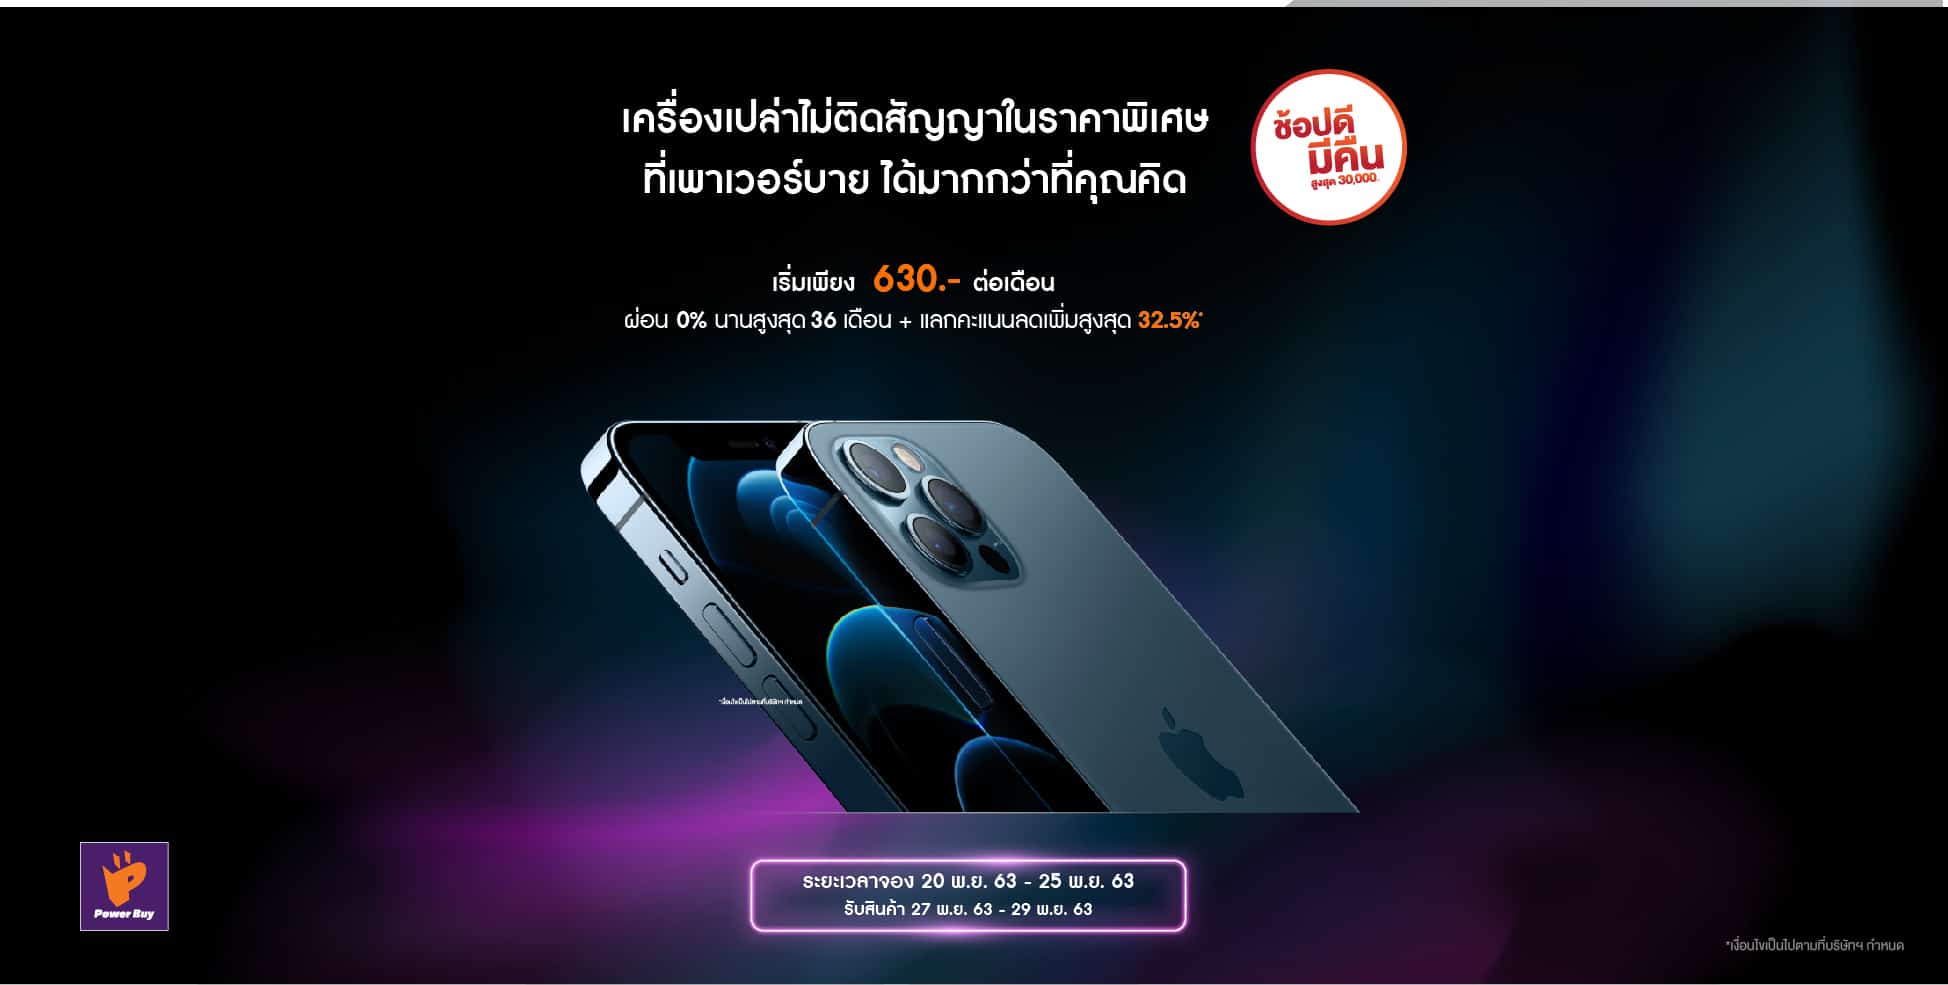 iPhone 12 Power Buy Promotion Pre Booking